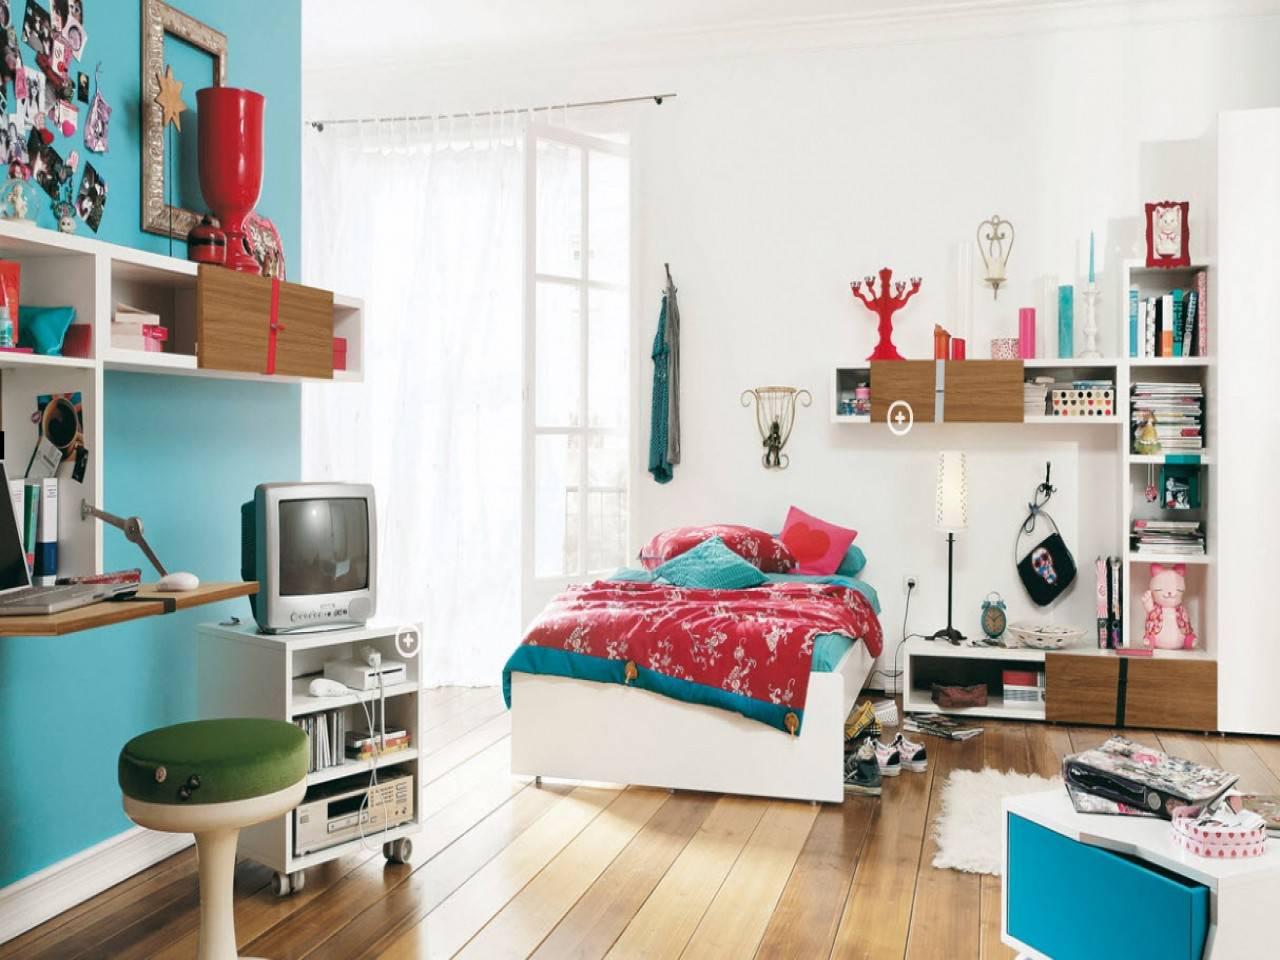 Bedroom Organization Ideas For Small Spaces